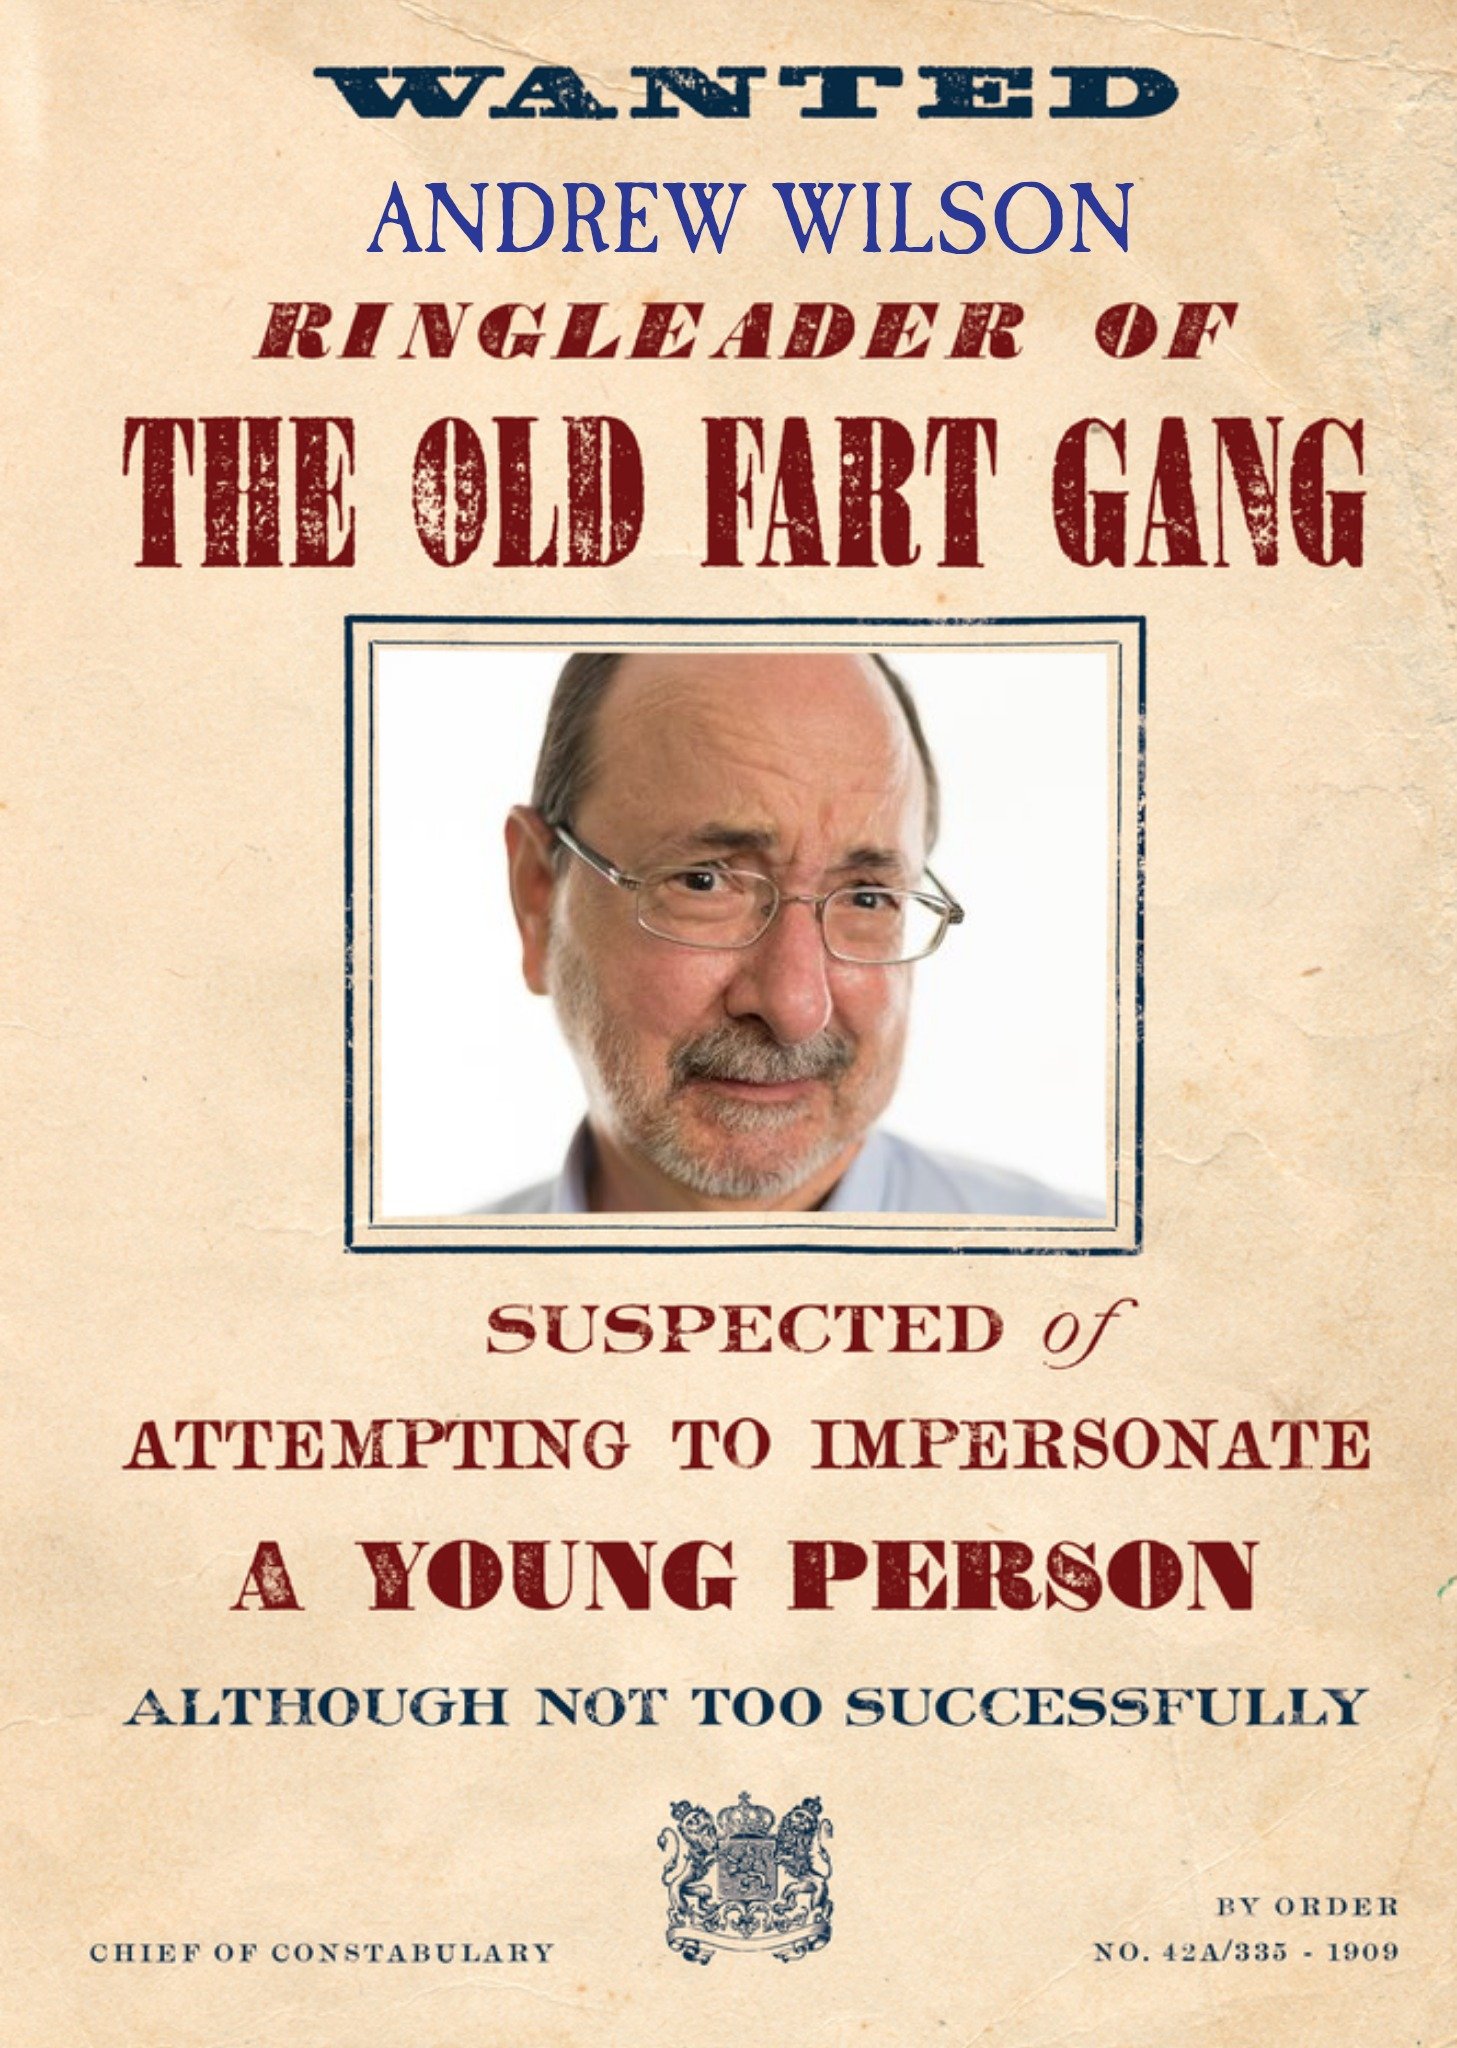 Moonpig Photo Upload Card Wanted Ringleader Of The Old Fart Gang Card, Large